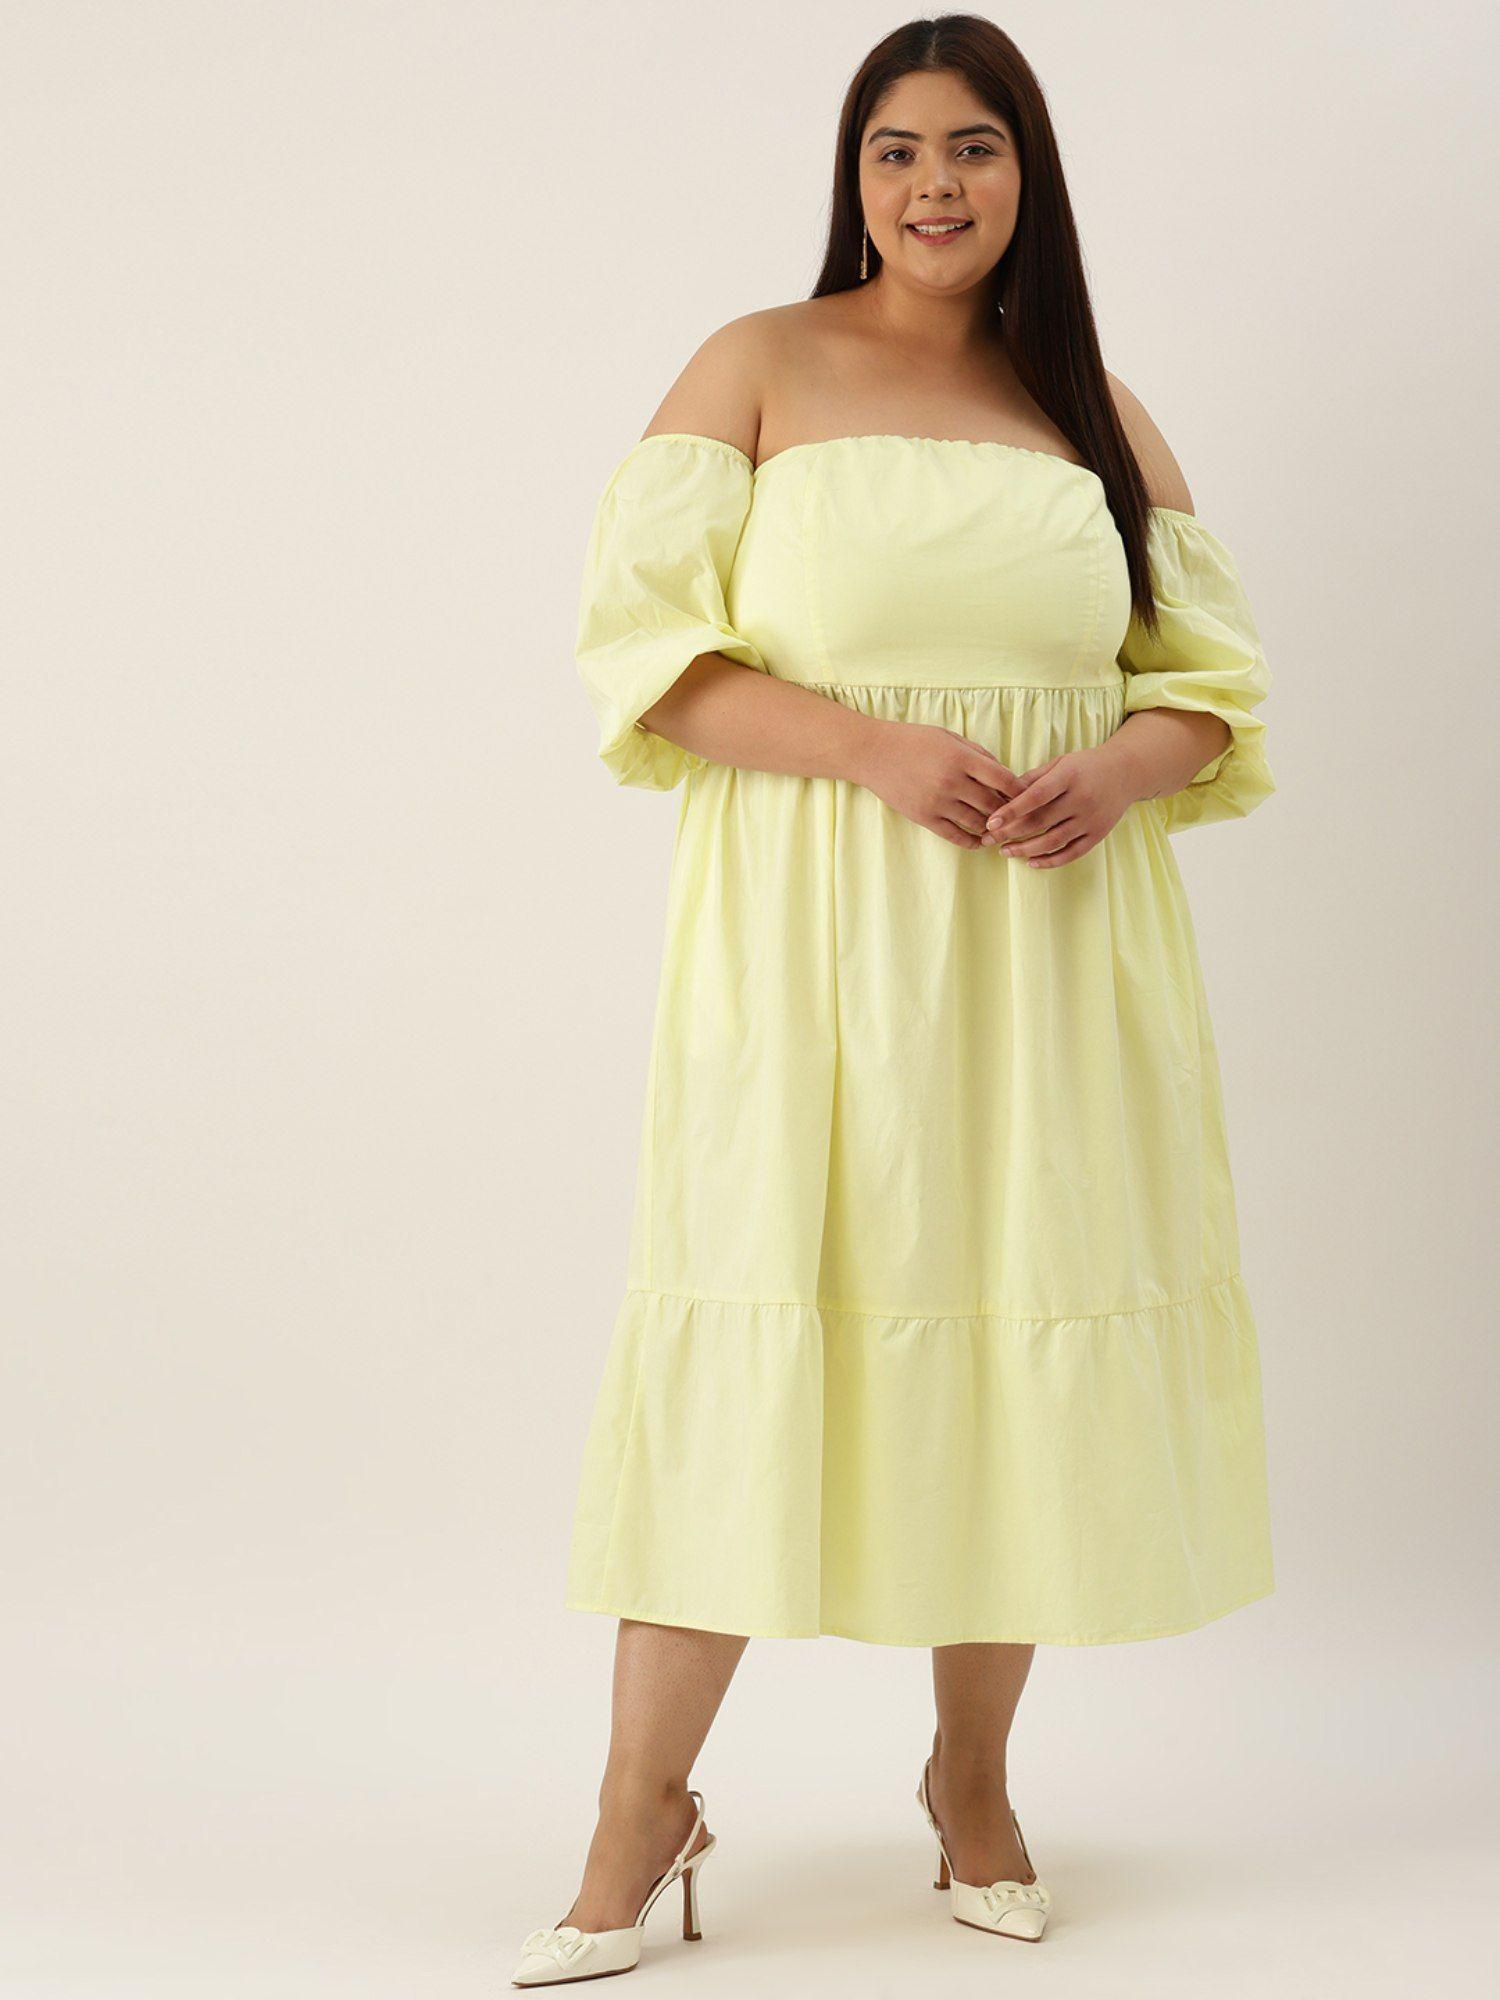 plus-size-women's-cream-solid-color-puff-sleeves-cotton-woven-dress